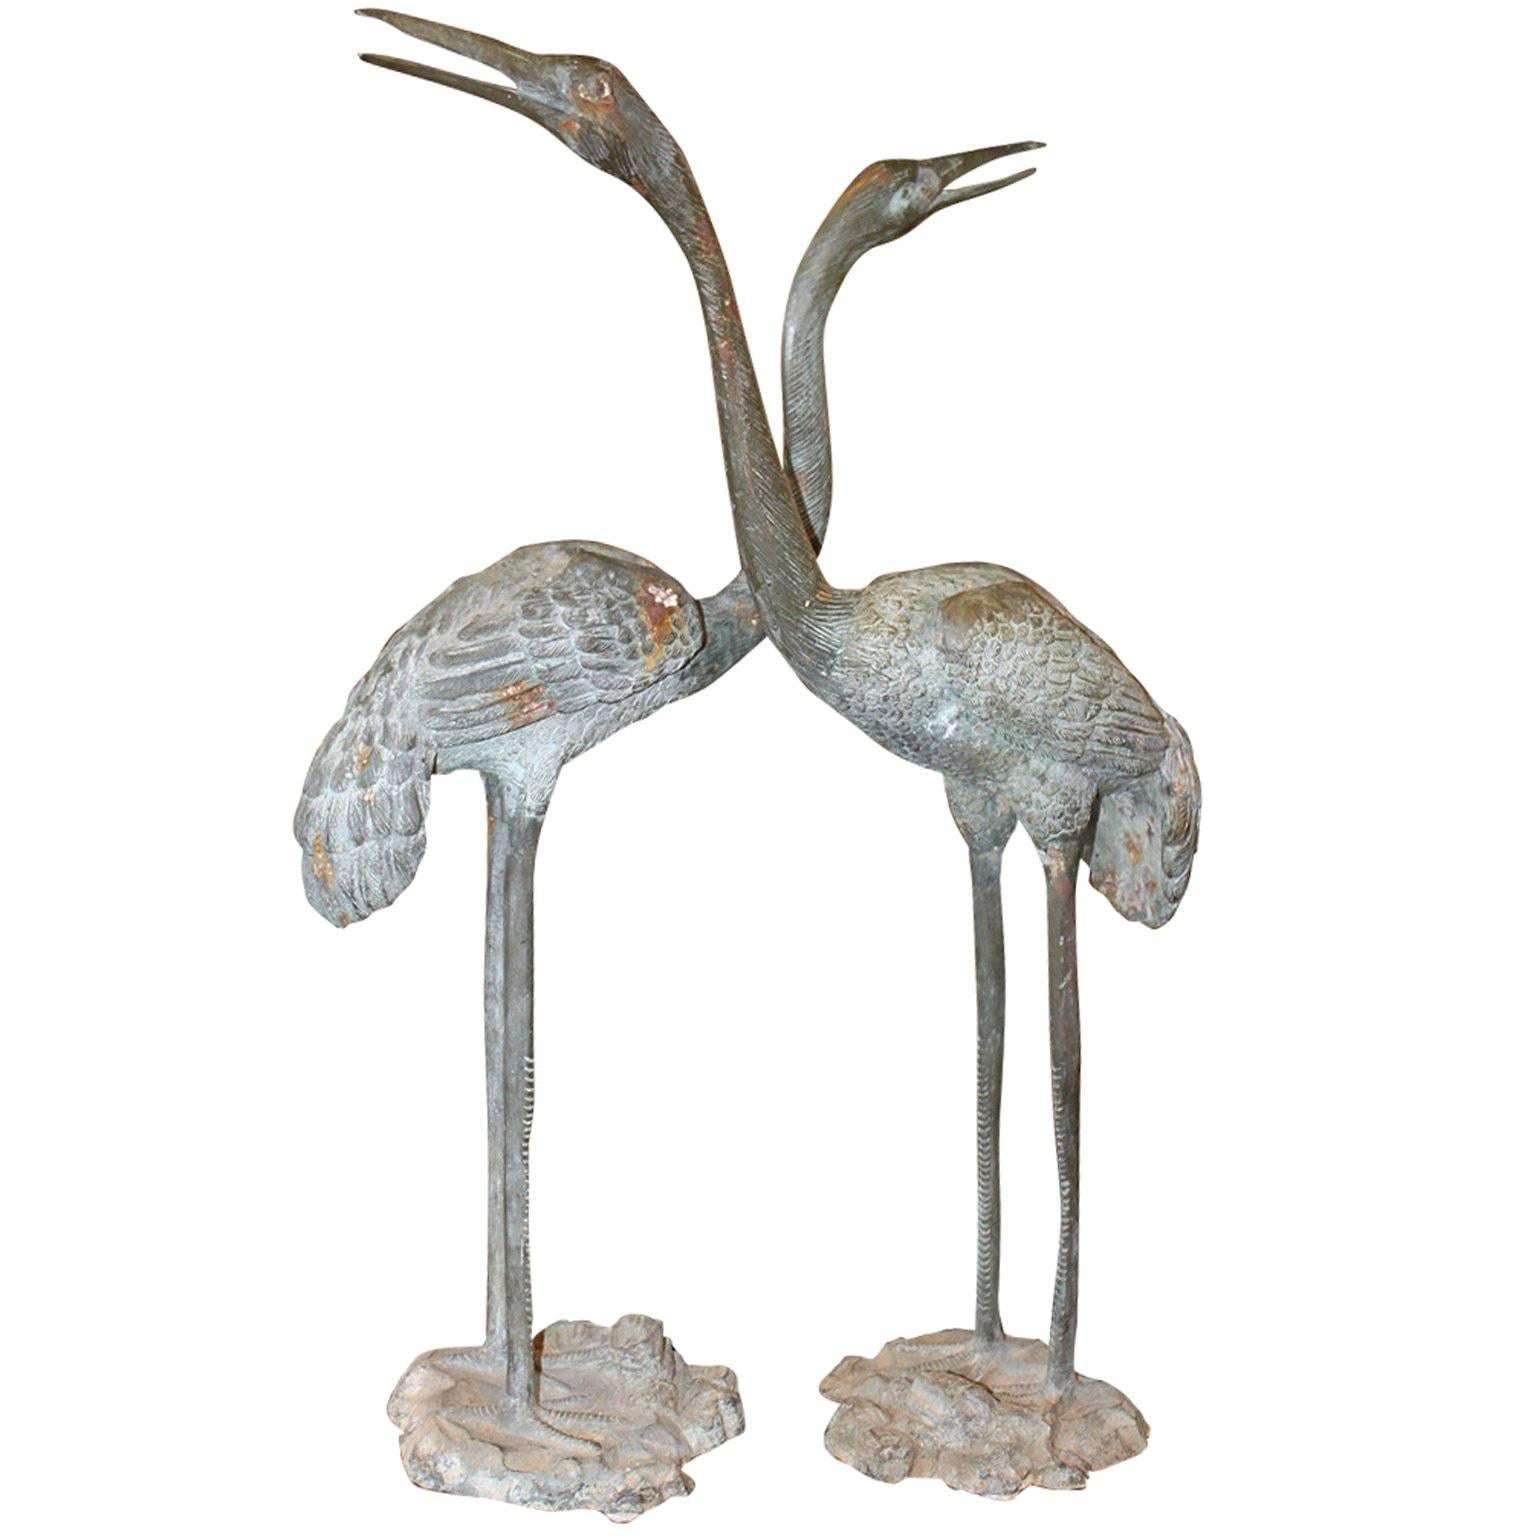 A Pair of Tall Bronze Crane Sculptures from the 19th Century